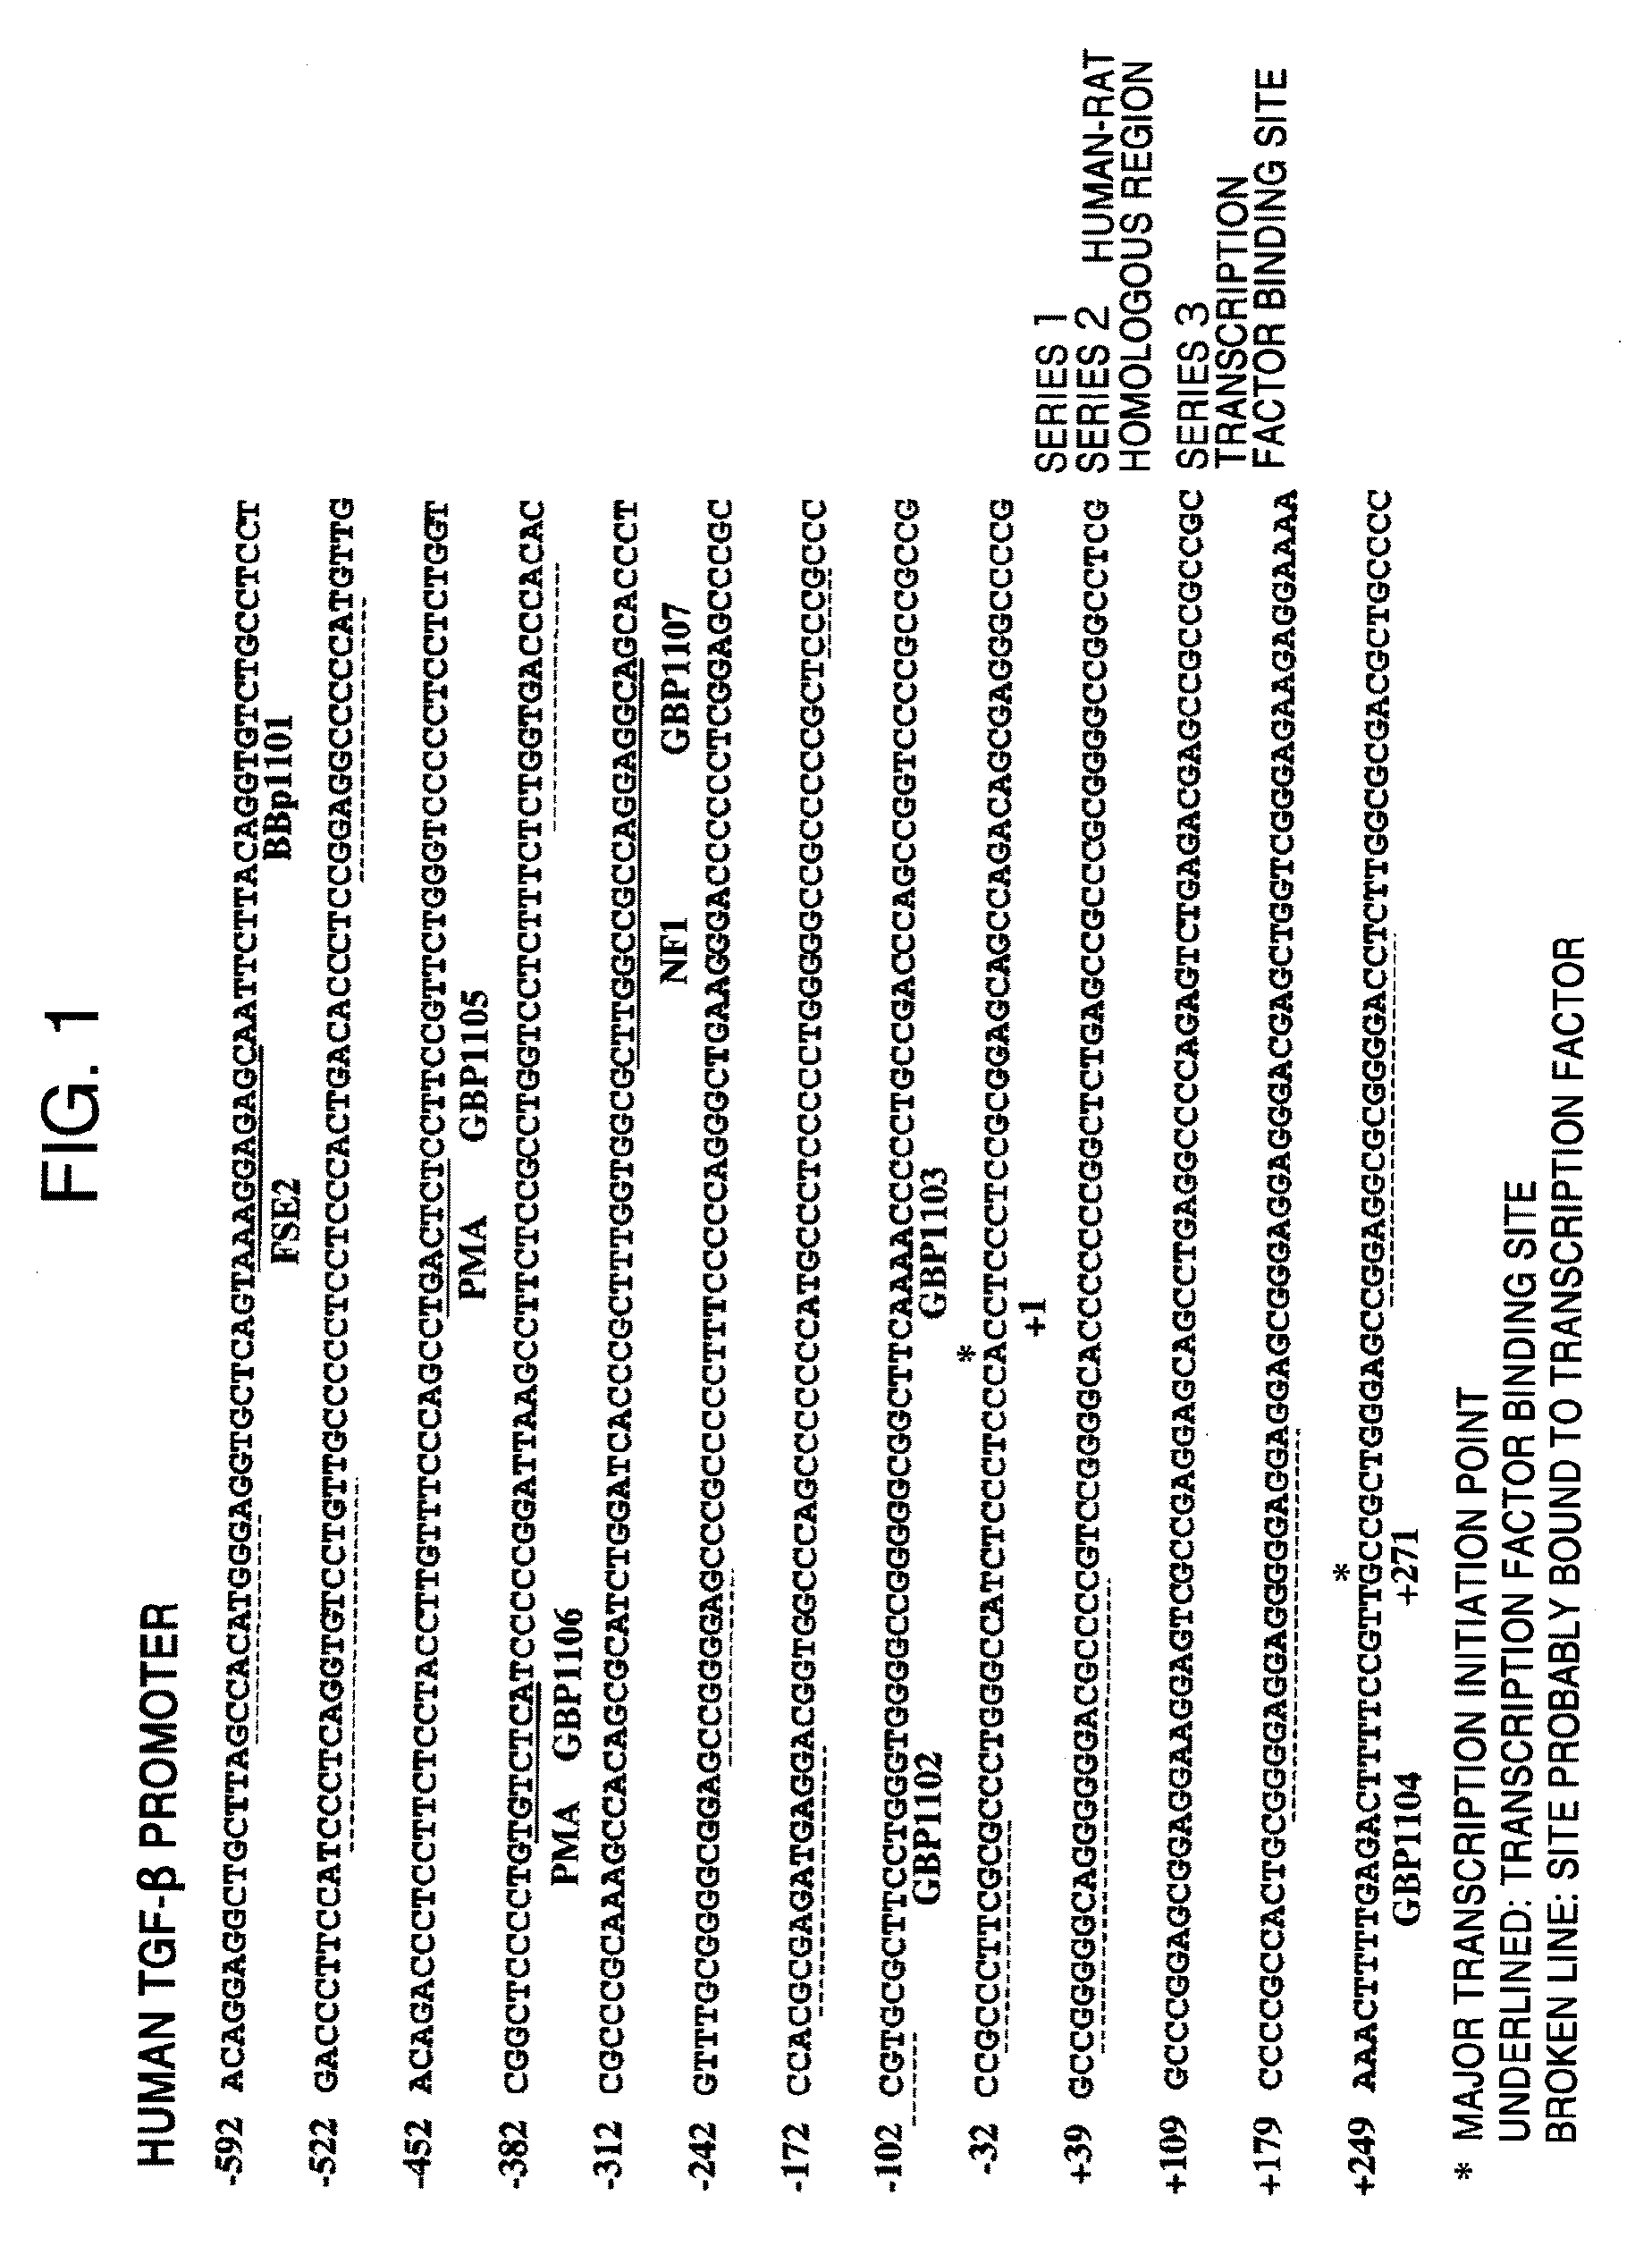 Topical therapeutic agent for ophthalmic diseases comprising compound capable of binding specifically to DNA sequence